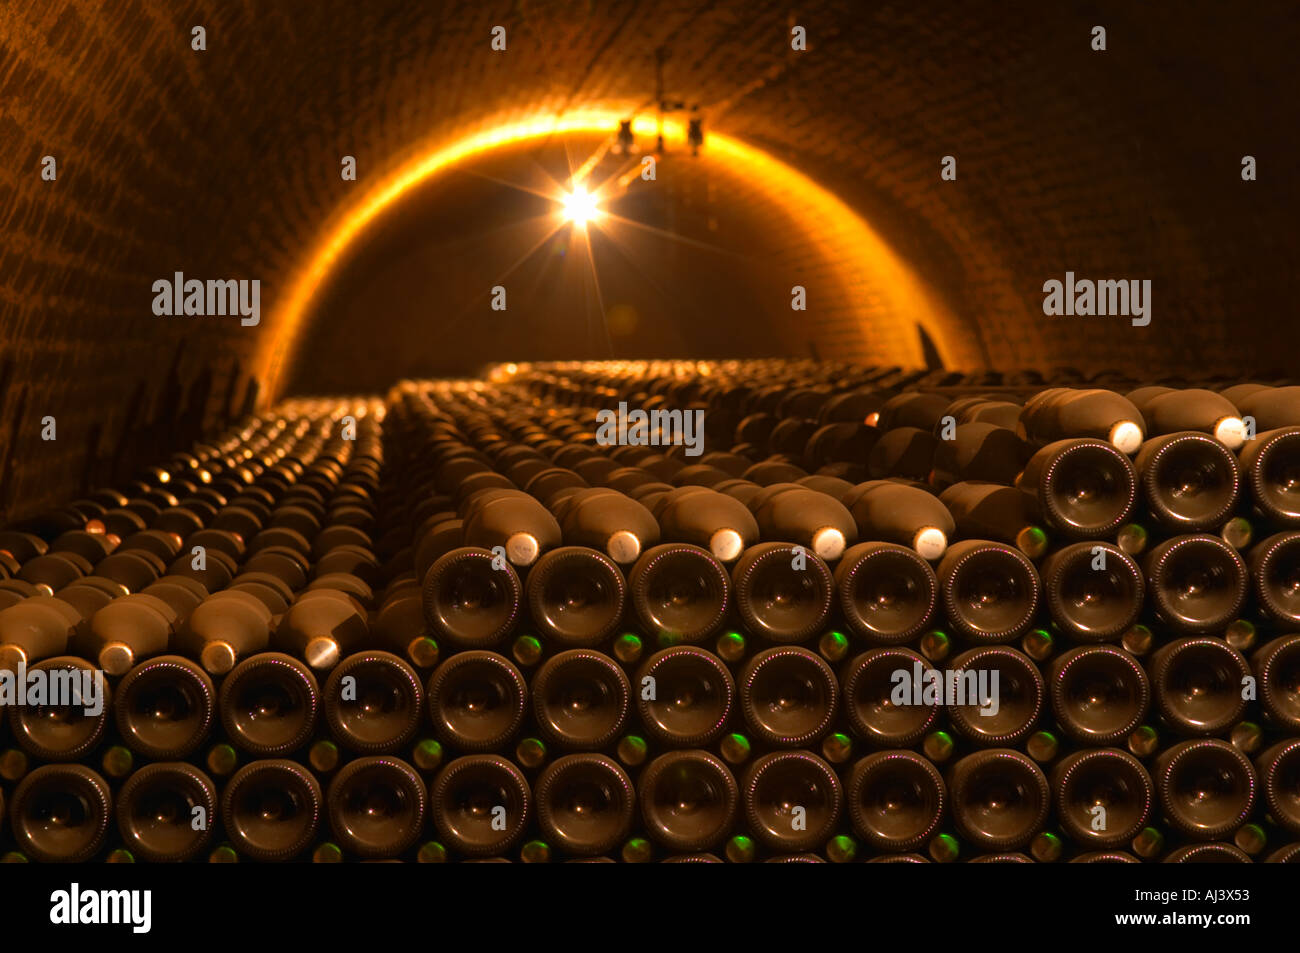 Champagne bottles stacked in an underground vaulted cellar closed with silver and green crown caps capsules in total 129956 bottles at Champagne Deutz in Ay, Vallee de la Marne, Champagne, Marne, Ardennes, France Stock Photo